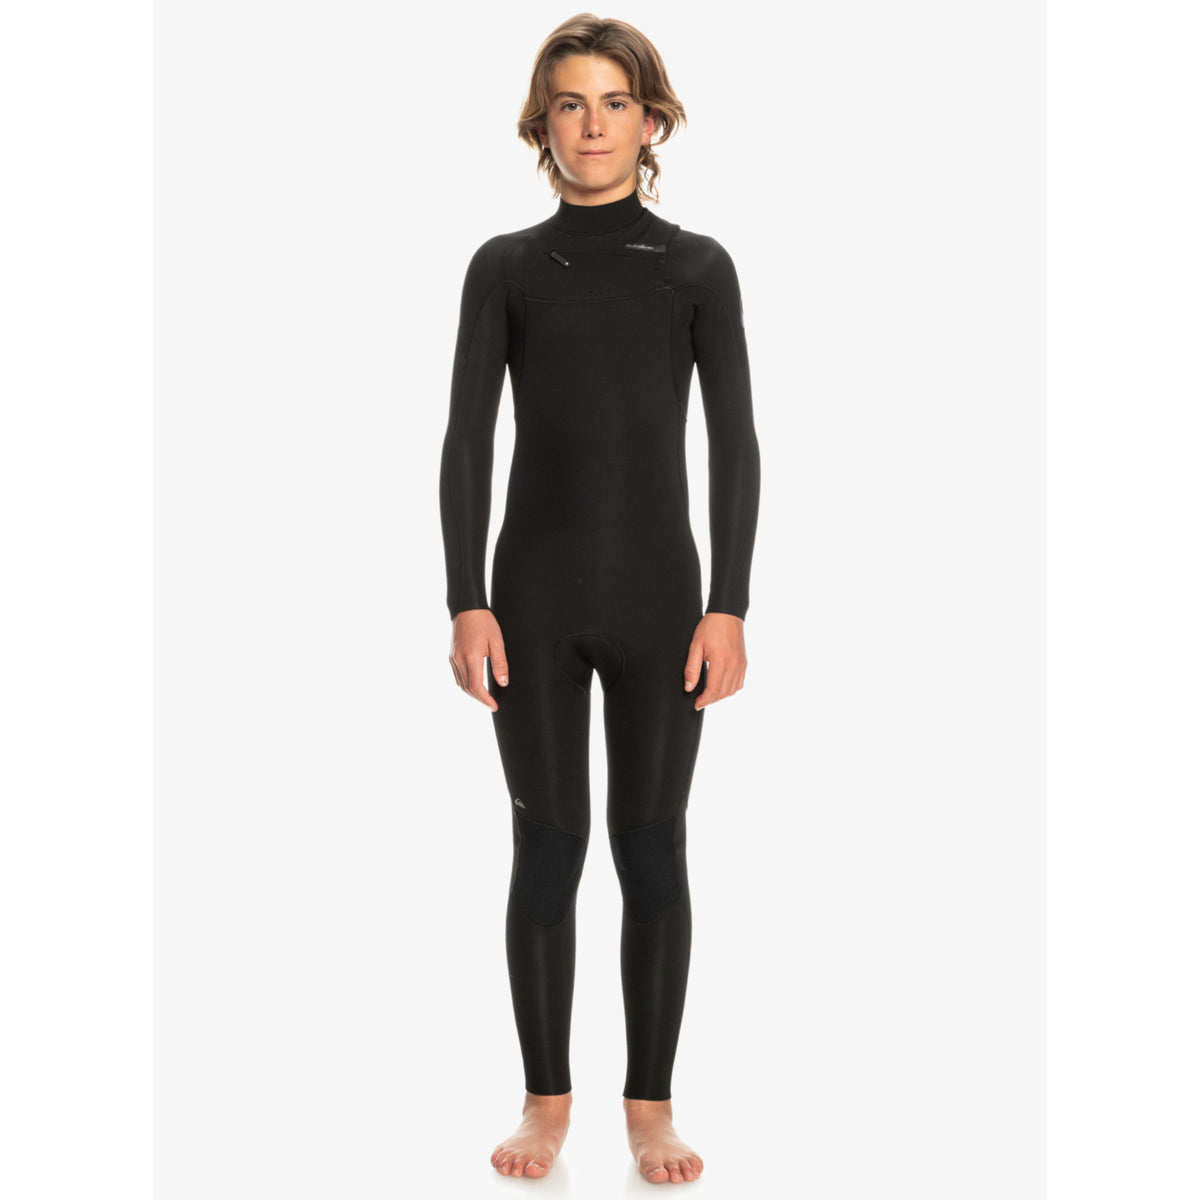 Quiksilver Boys Everyday Session 3/2 CZ Steamer Wetsuit